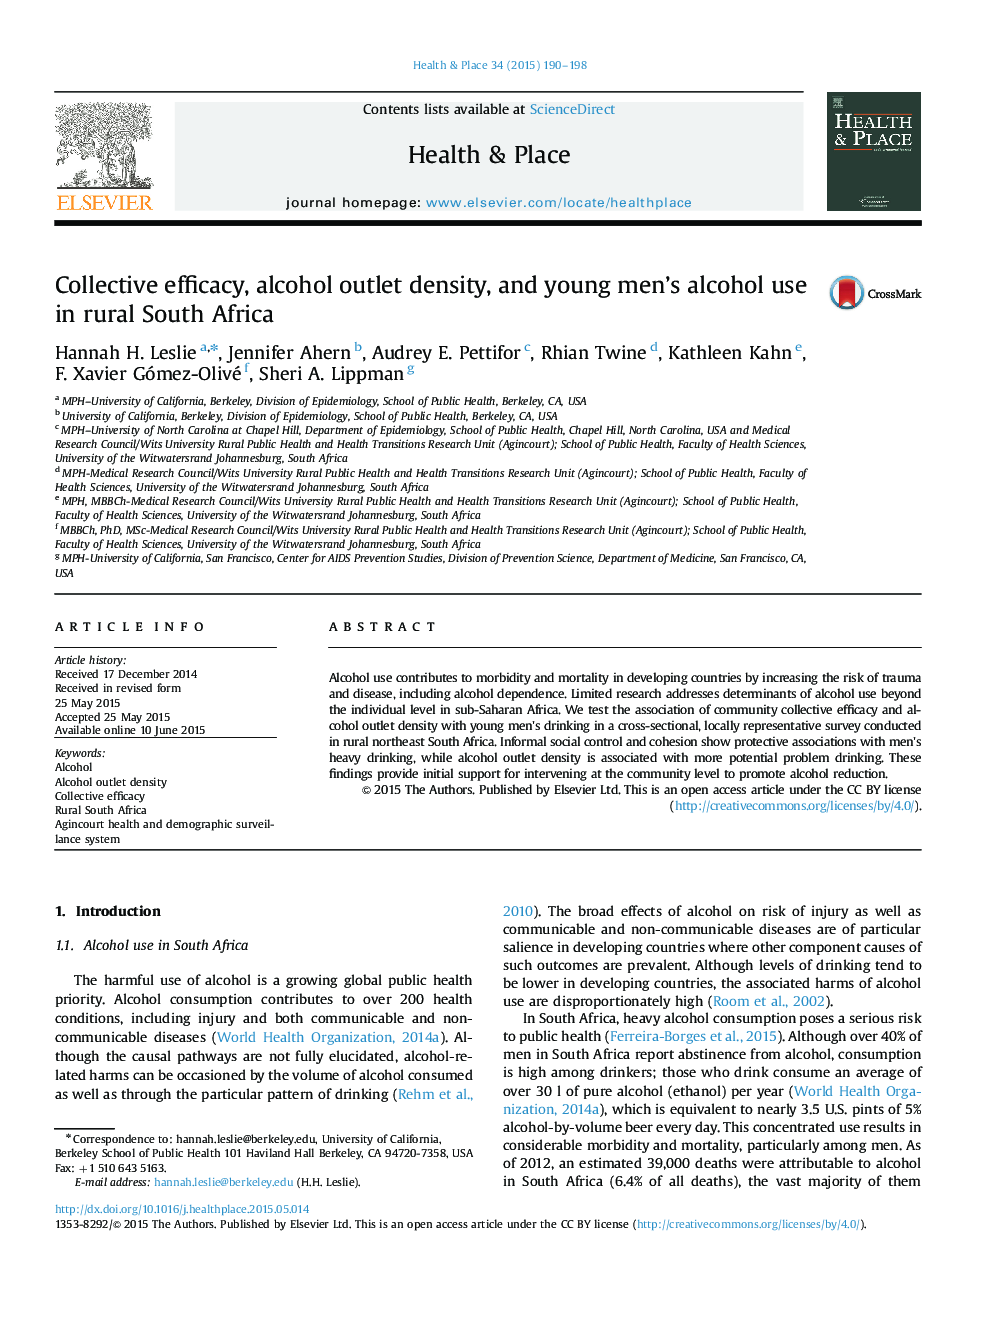 Collective efficacy, alcohol outlet density, and young men's alcohol use in rural South Africa